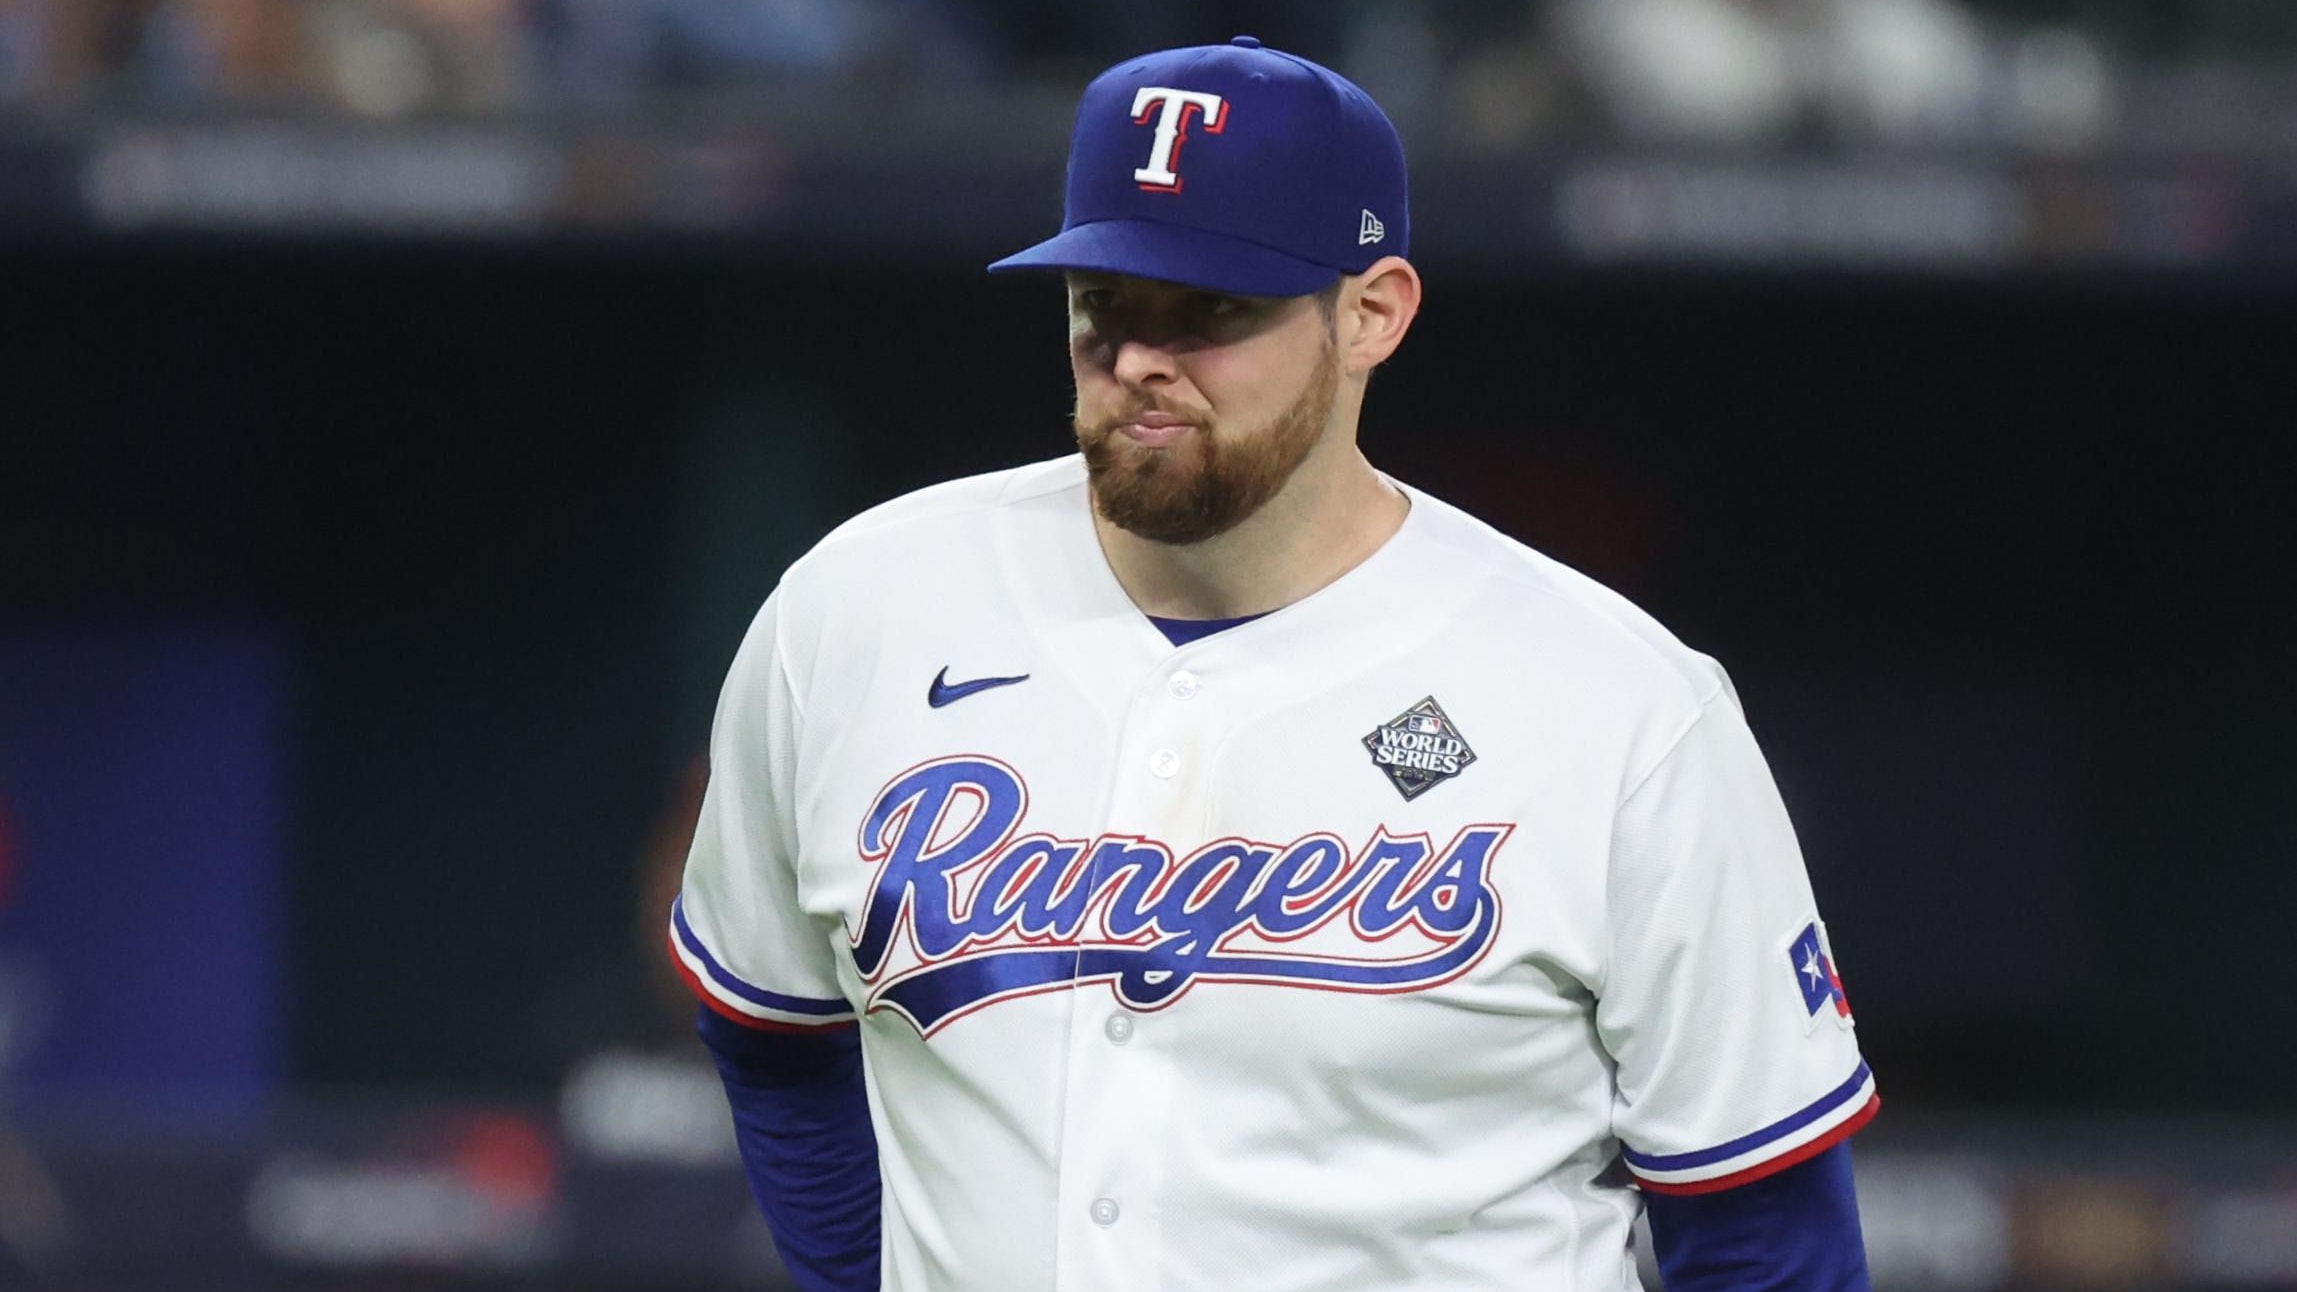 Texas Rangers starting pitcher Jordan Montgomery (52) leaves the game in the 7th inning.